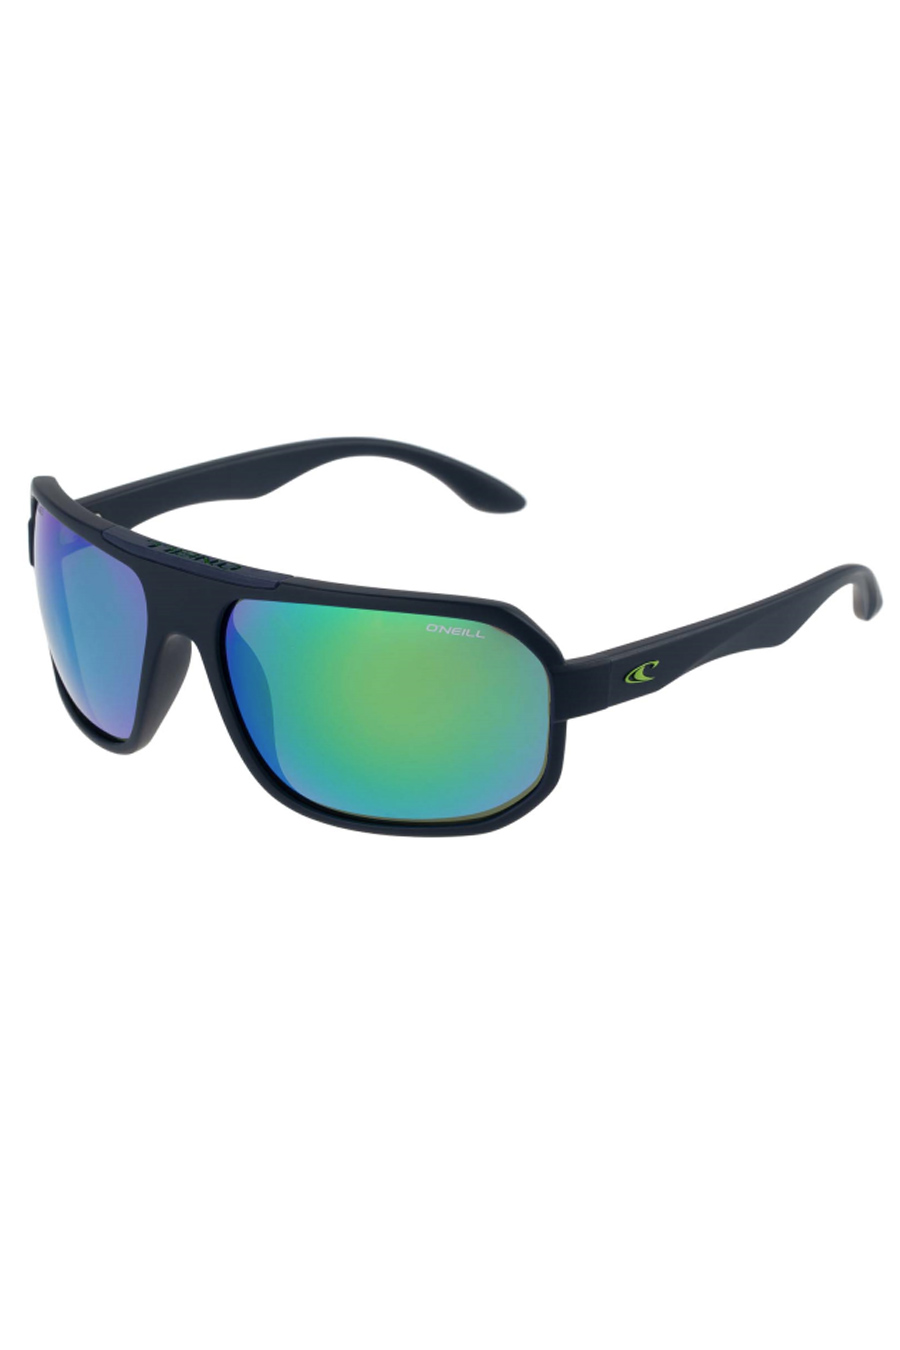 Saulesbrilles ONEILL ONS-9028-20-106P